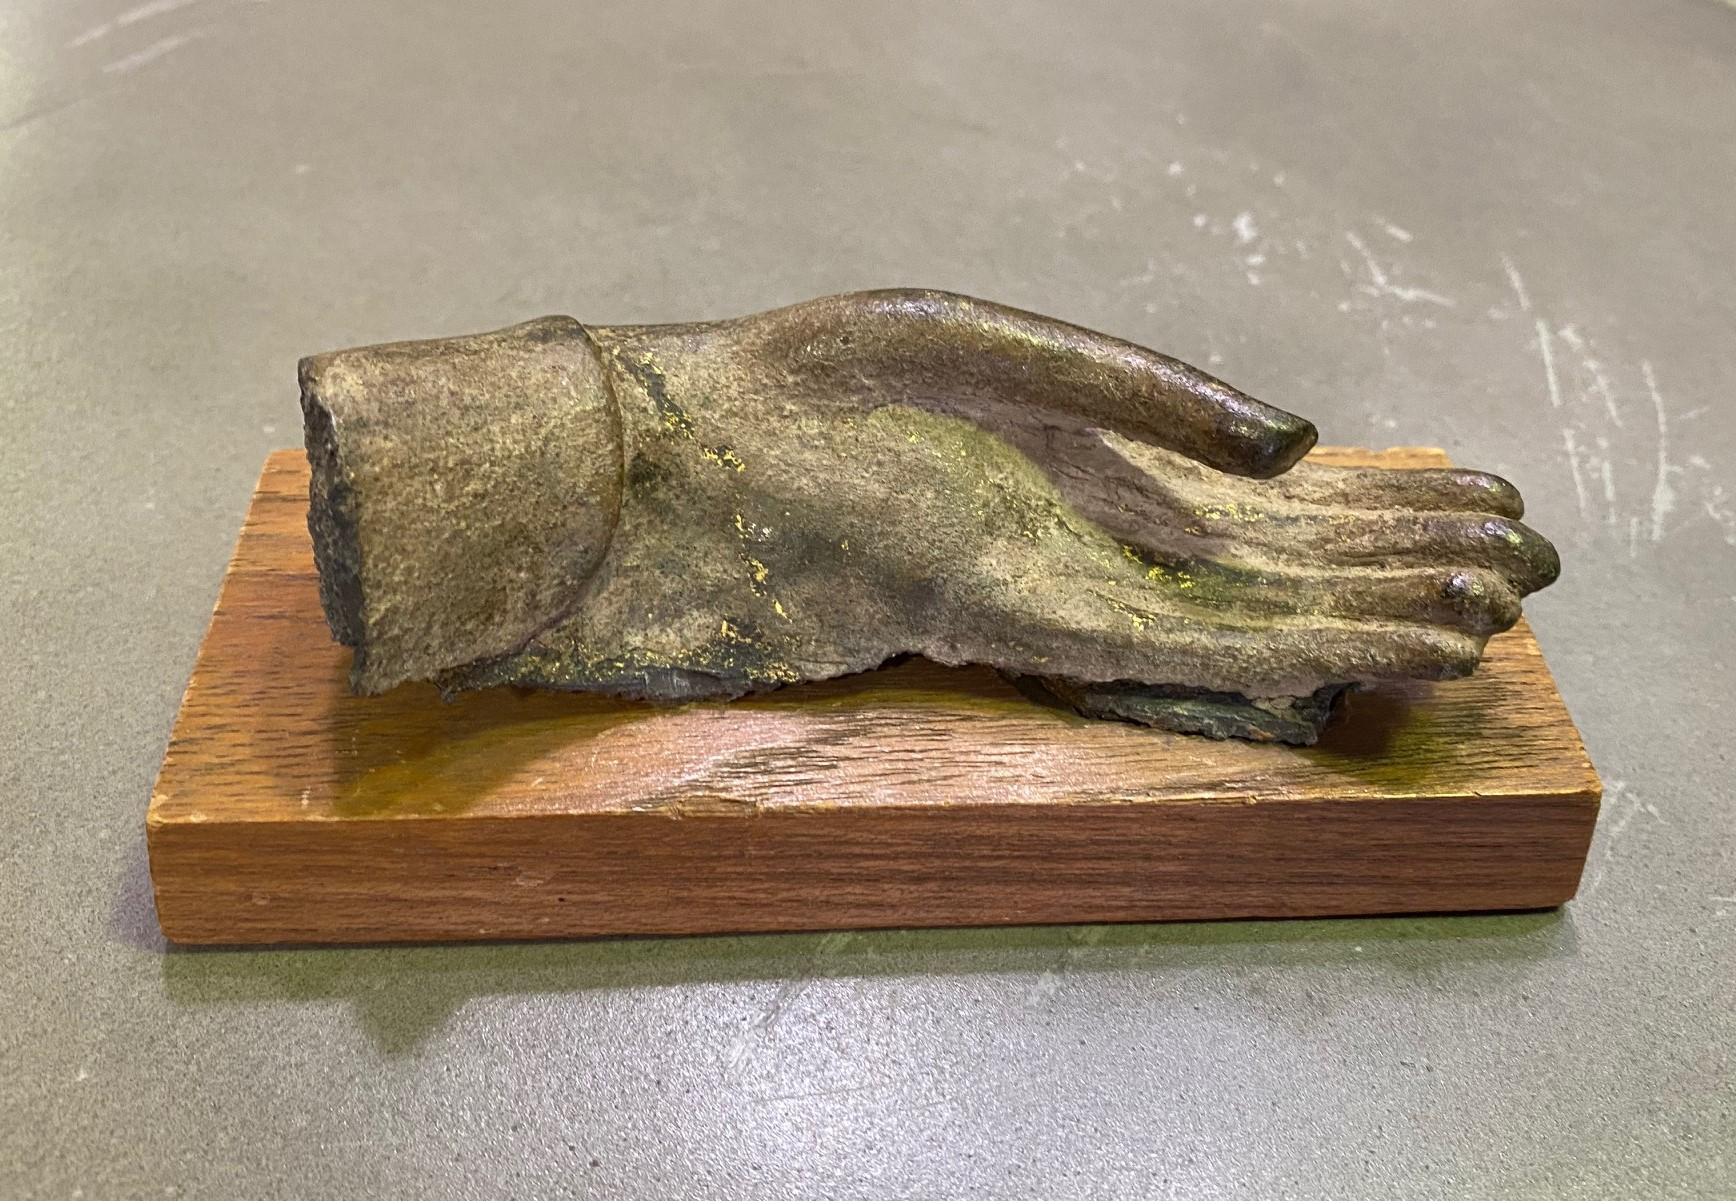 A wonderful and very special piece.

This bronze buddha hand sculpture, perhaps a fragment of a larger piece at one time, originally came from the prestigious Doris Wiener Gallery in New York City (please see the gallery tag on the underside of